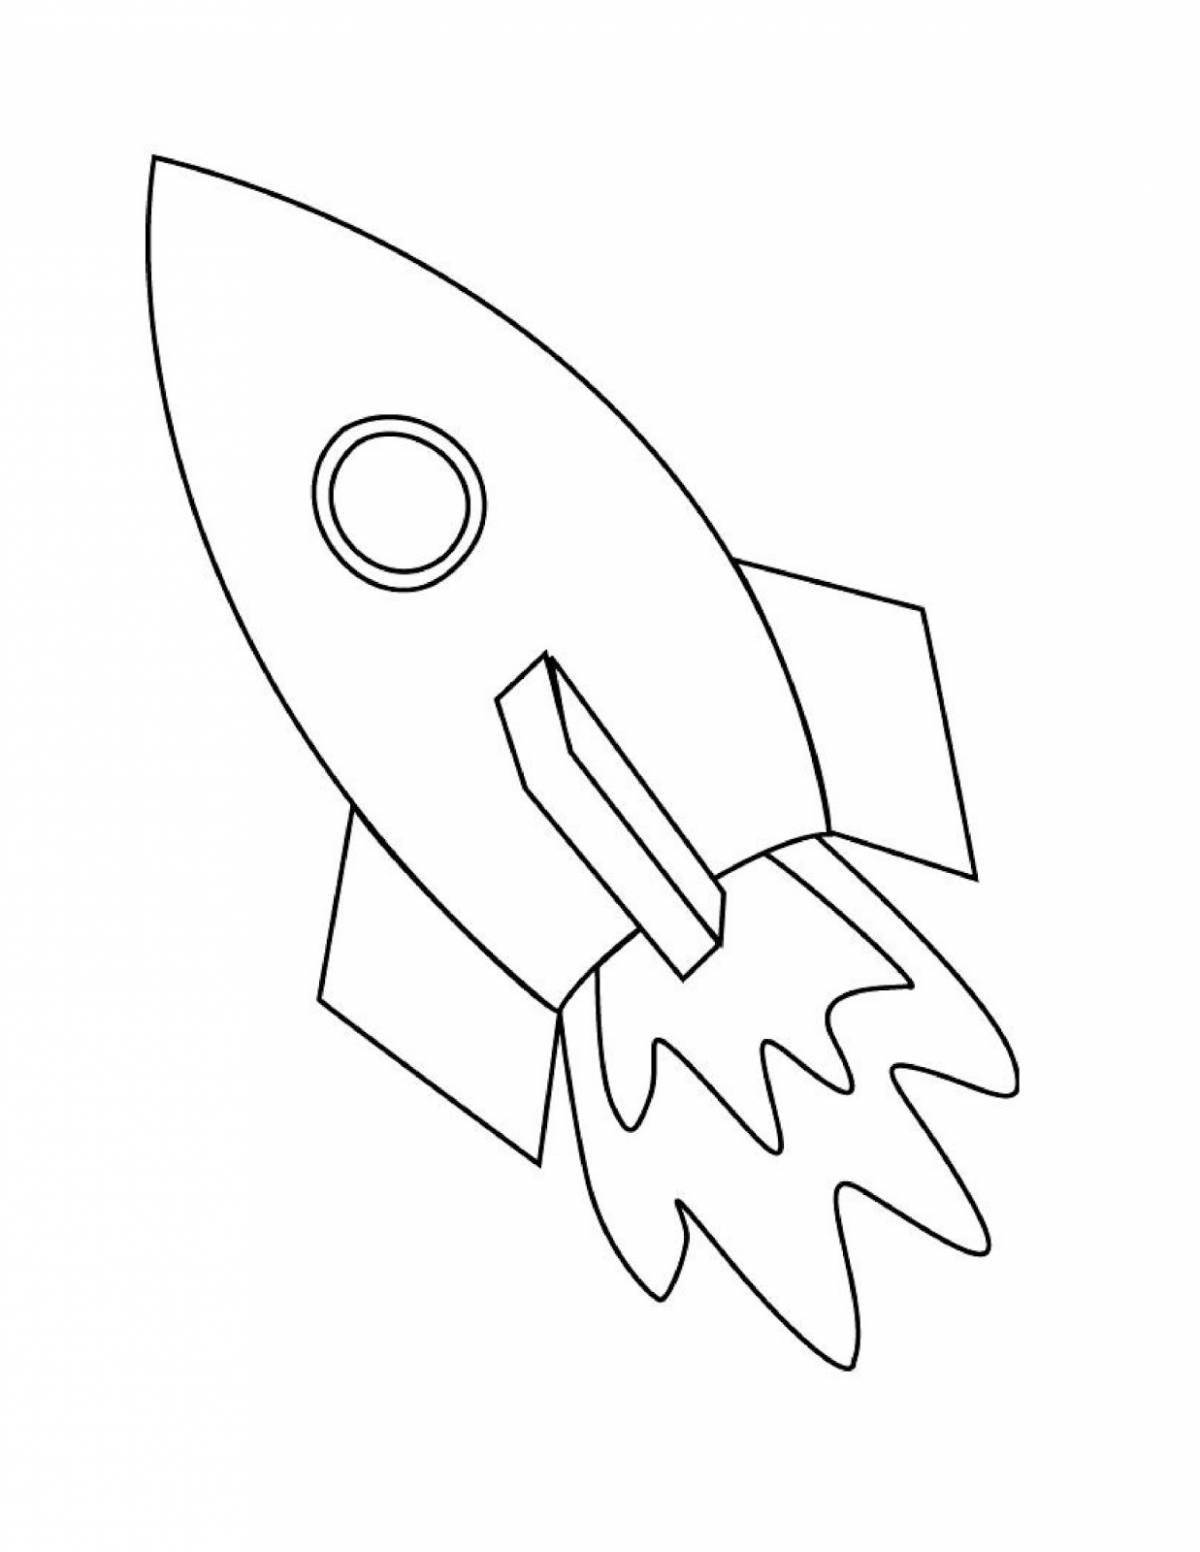 Great space rocket coloring page